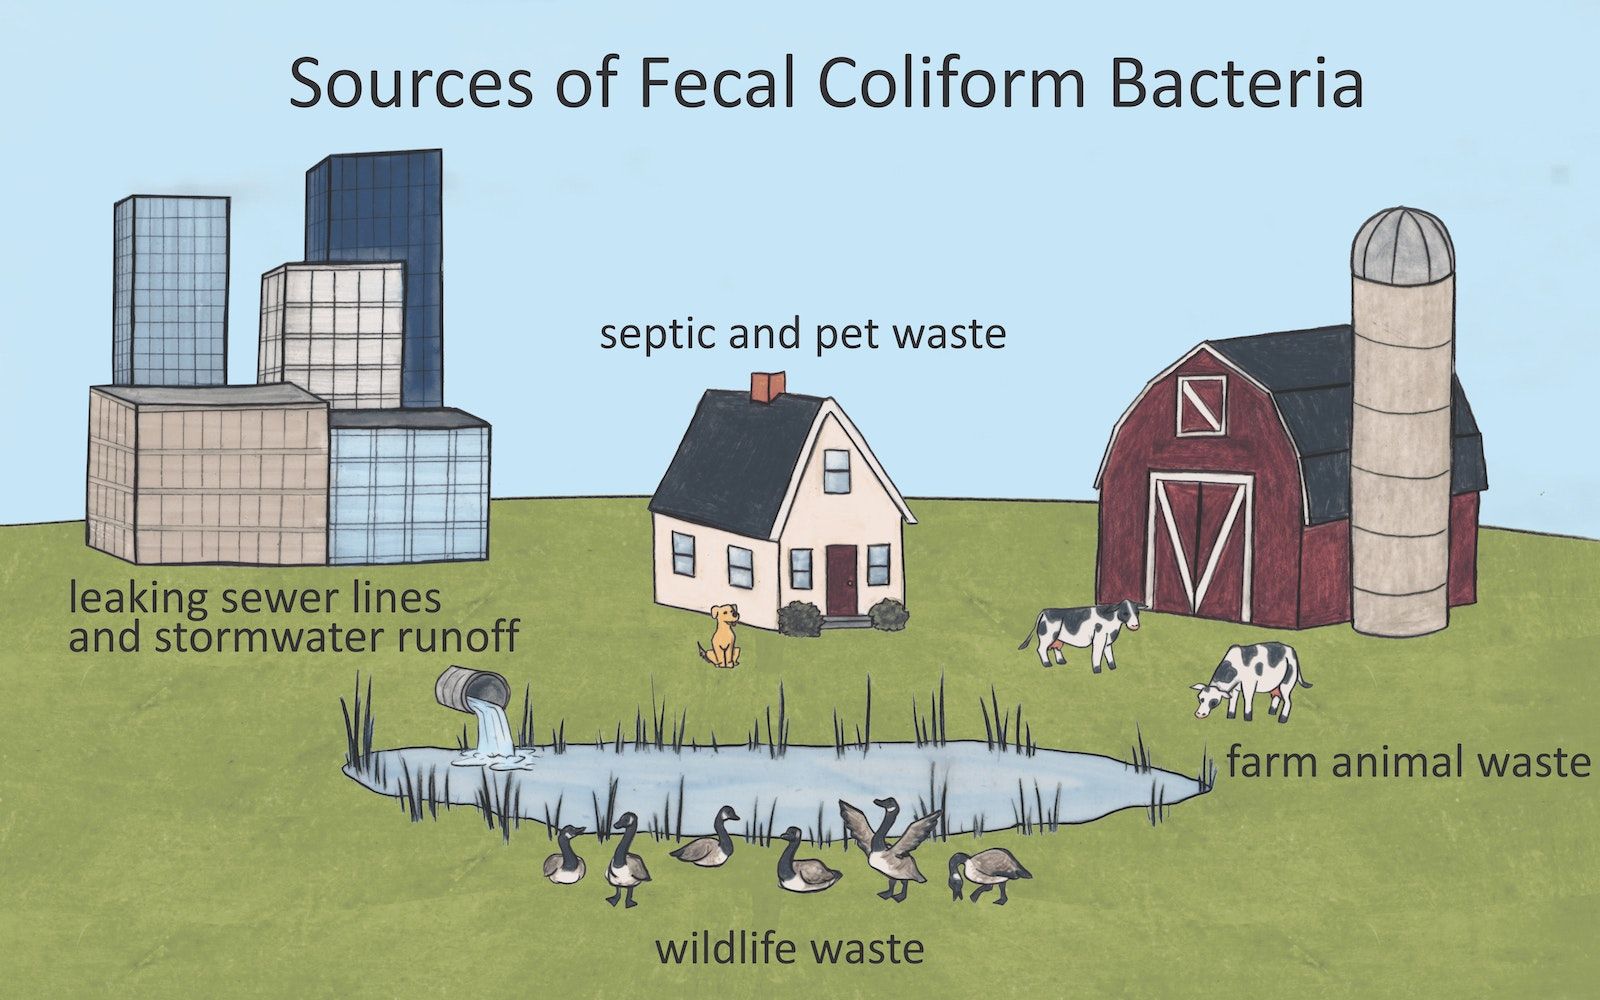 Drawing illustrating different sources of fecal coliform bacteria. Tall buildings with the label “leaking sewer lines and stormwater runoff’, a house with the label “septic and pet waste”, and a farm with two cows with the label “farm animal waste” are shown in the background. A pond with ducks is shown in the foreground, with the label “wildlife waste”.